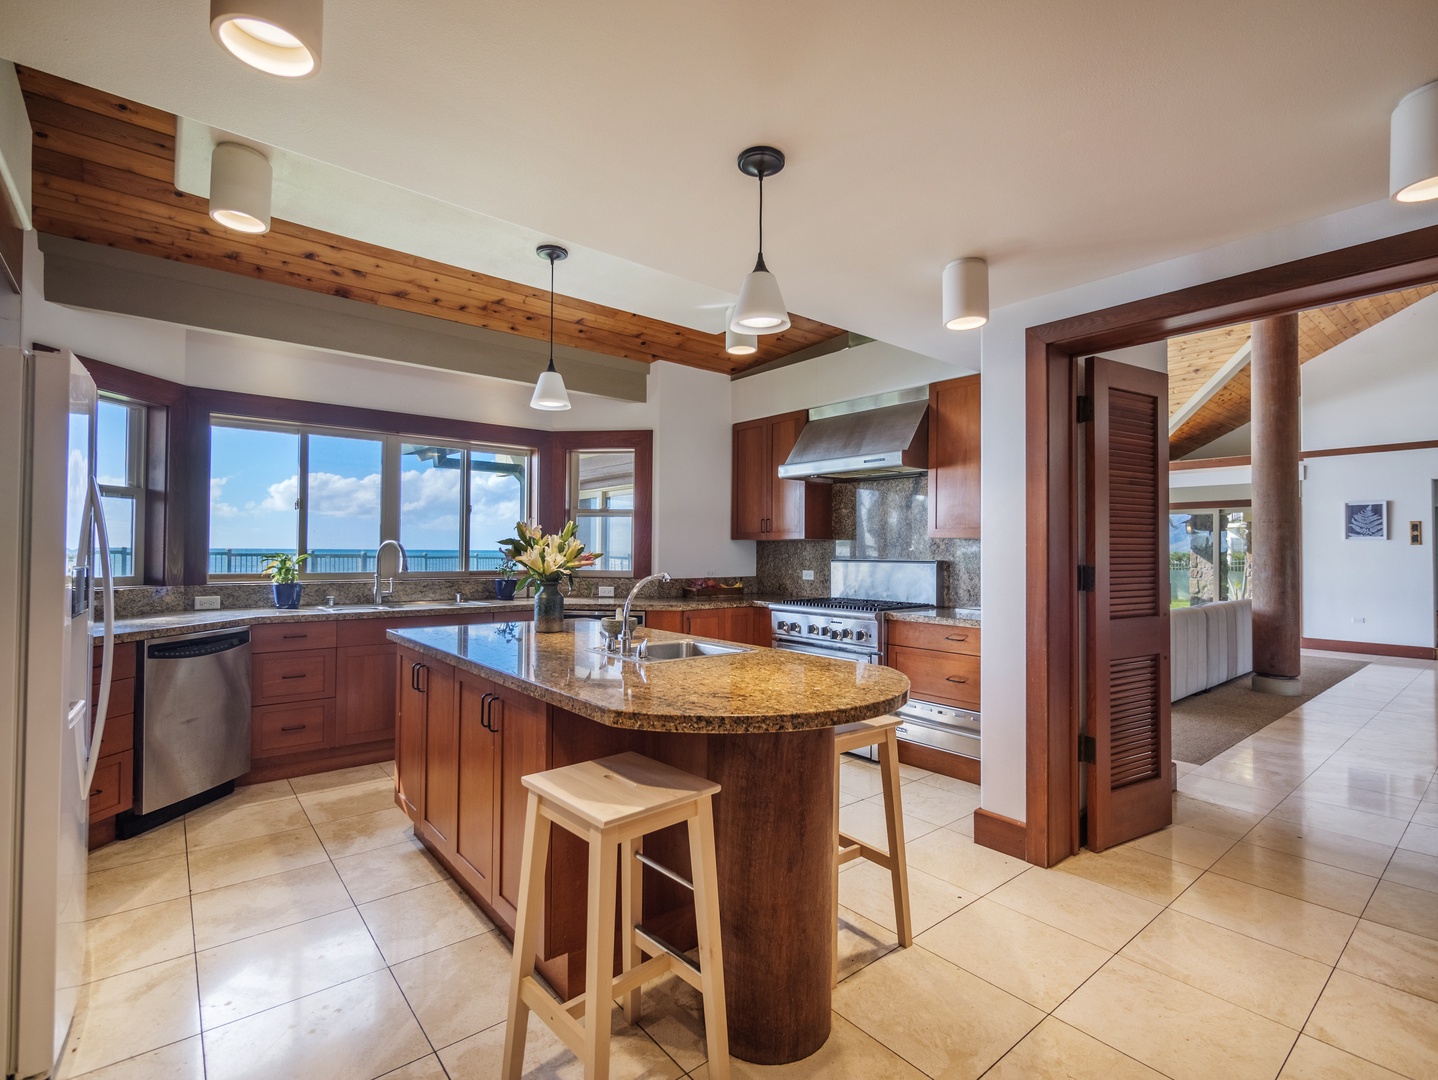 Waianae Vacation Rentals, Konishiki Beachhouse - Fully stocked kitchen with top-tier appliances, spacious breakfast bar for quick meals and entertainment.